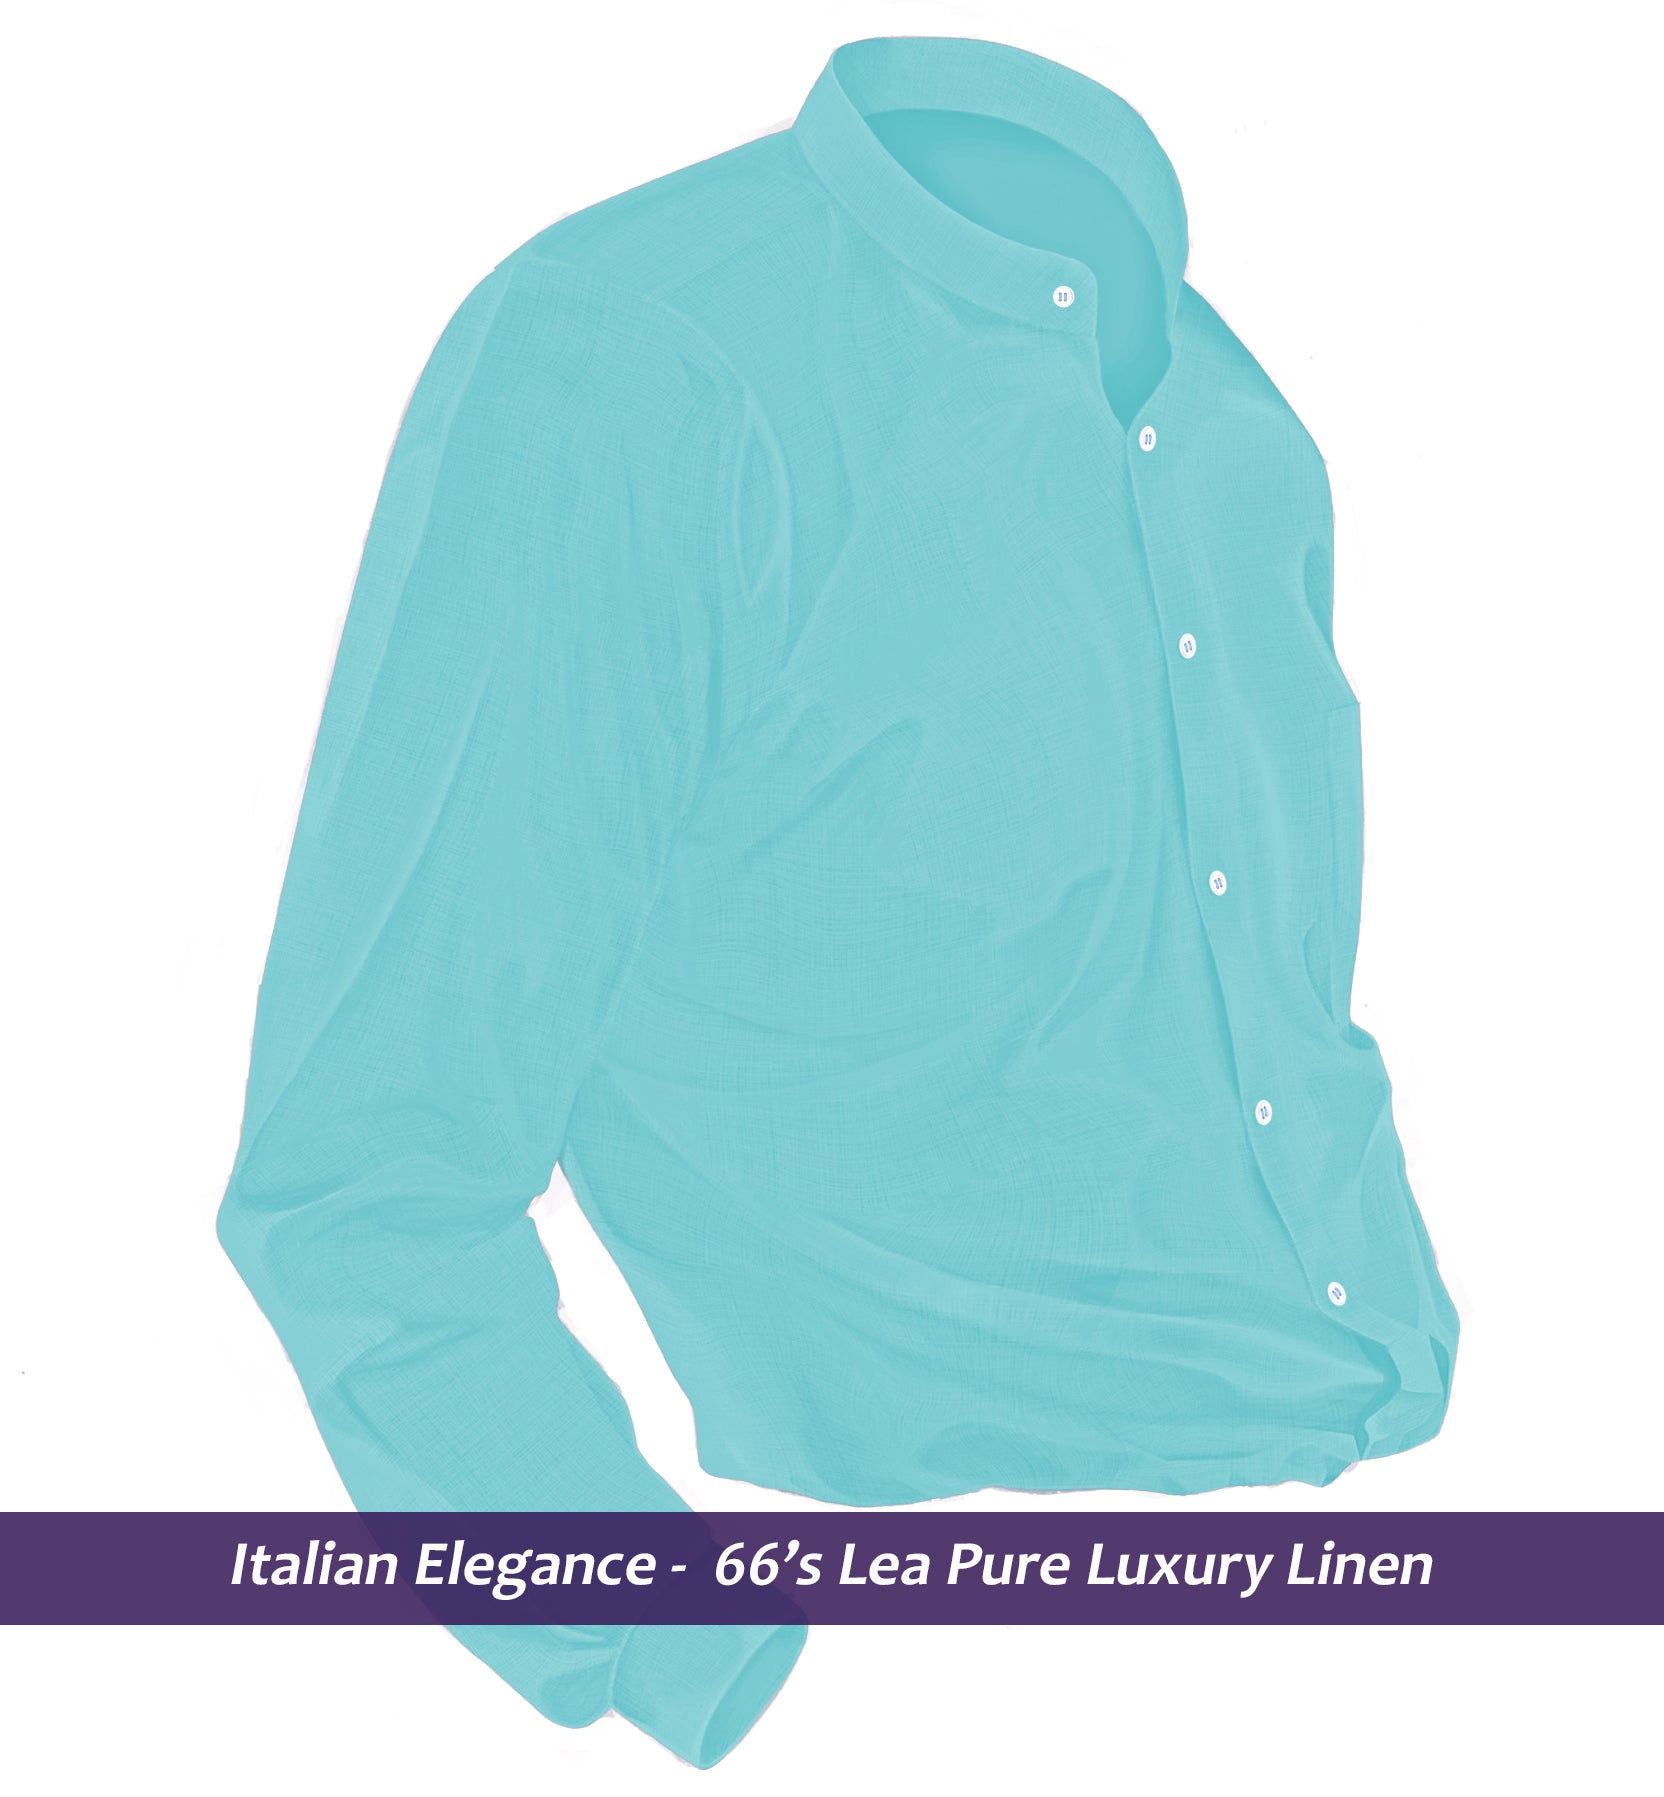 Munich- Turquoise Green Linen- Mandarin Collar- 66's Lea Pure Luxury Linen-Delivery from 9th May